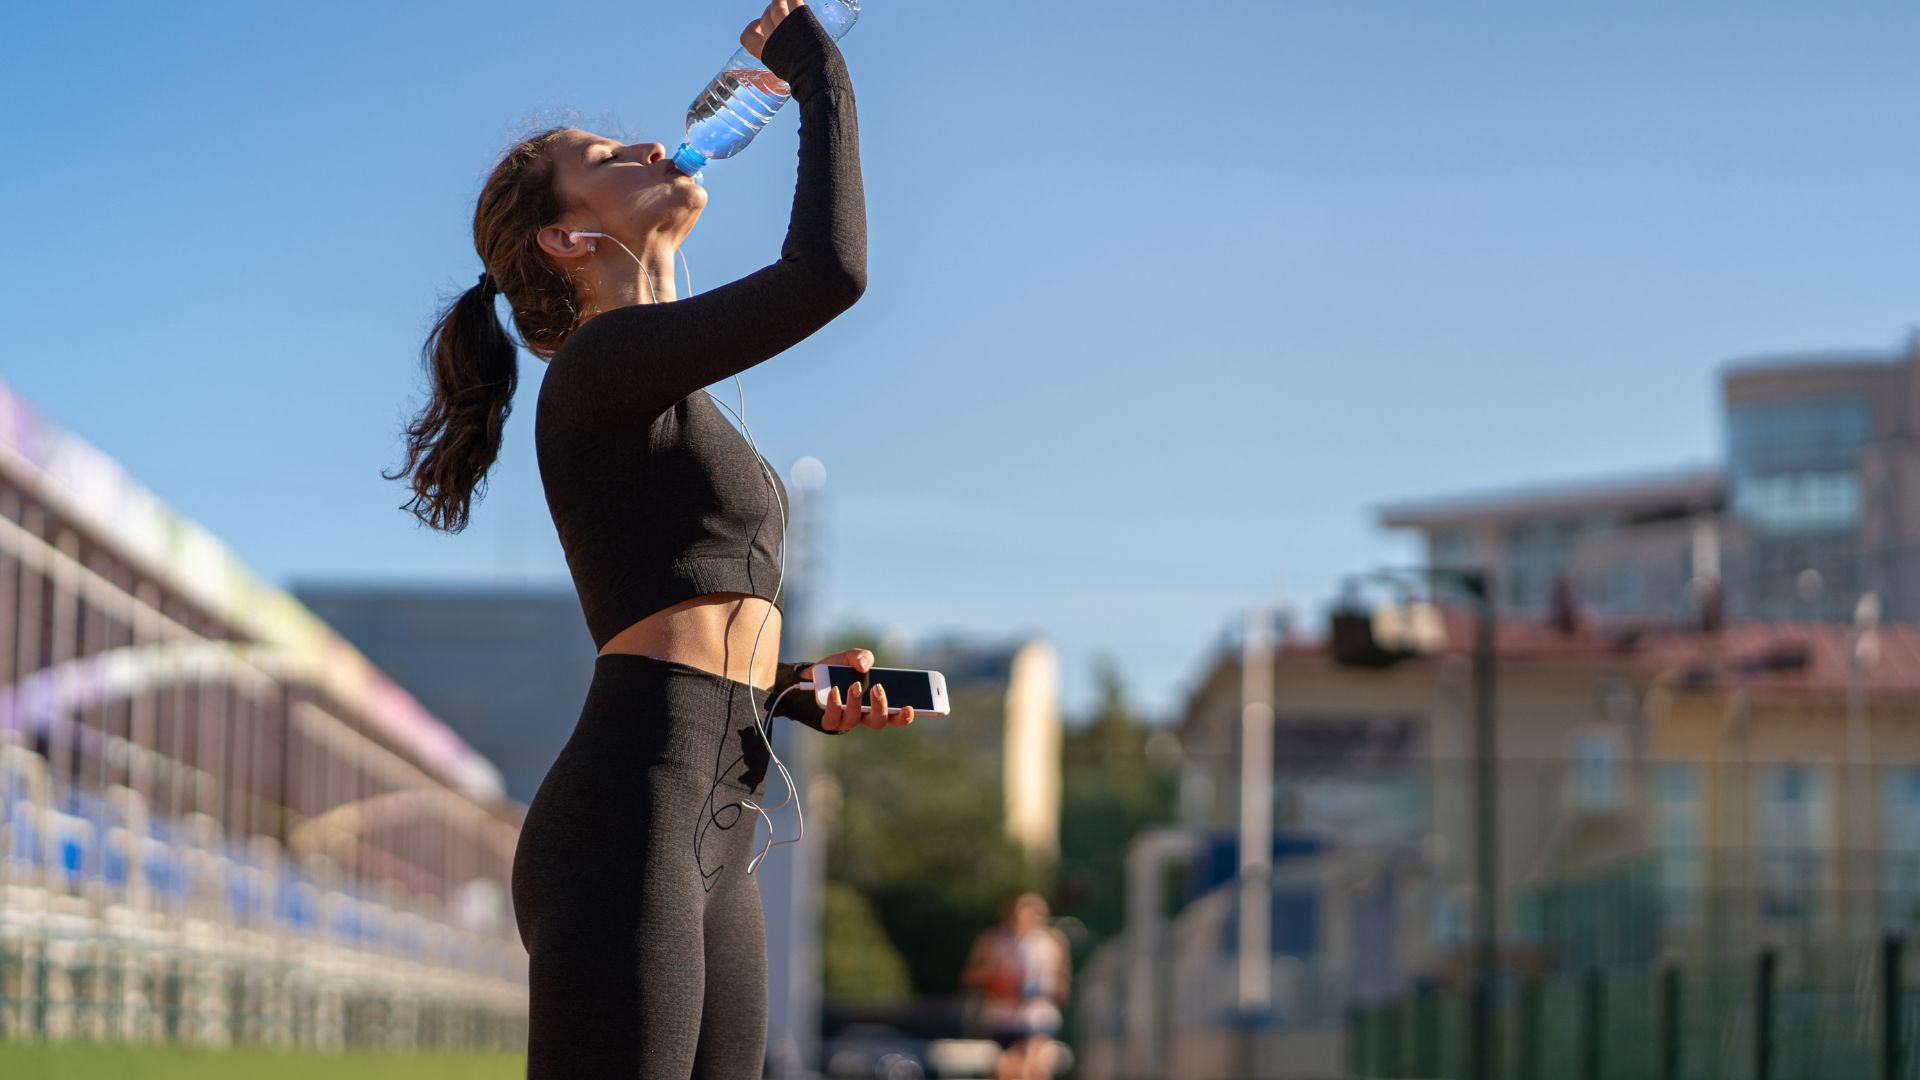 Fit Woman Drinking from Bottled Water after Workout